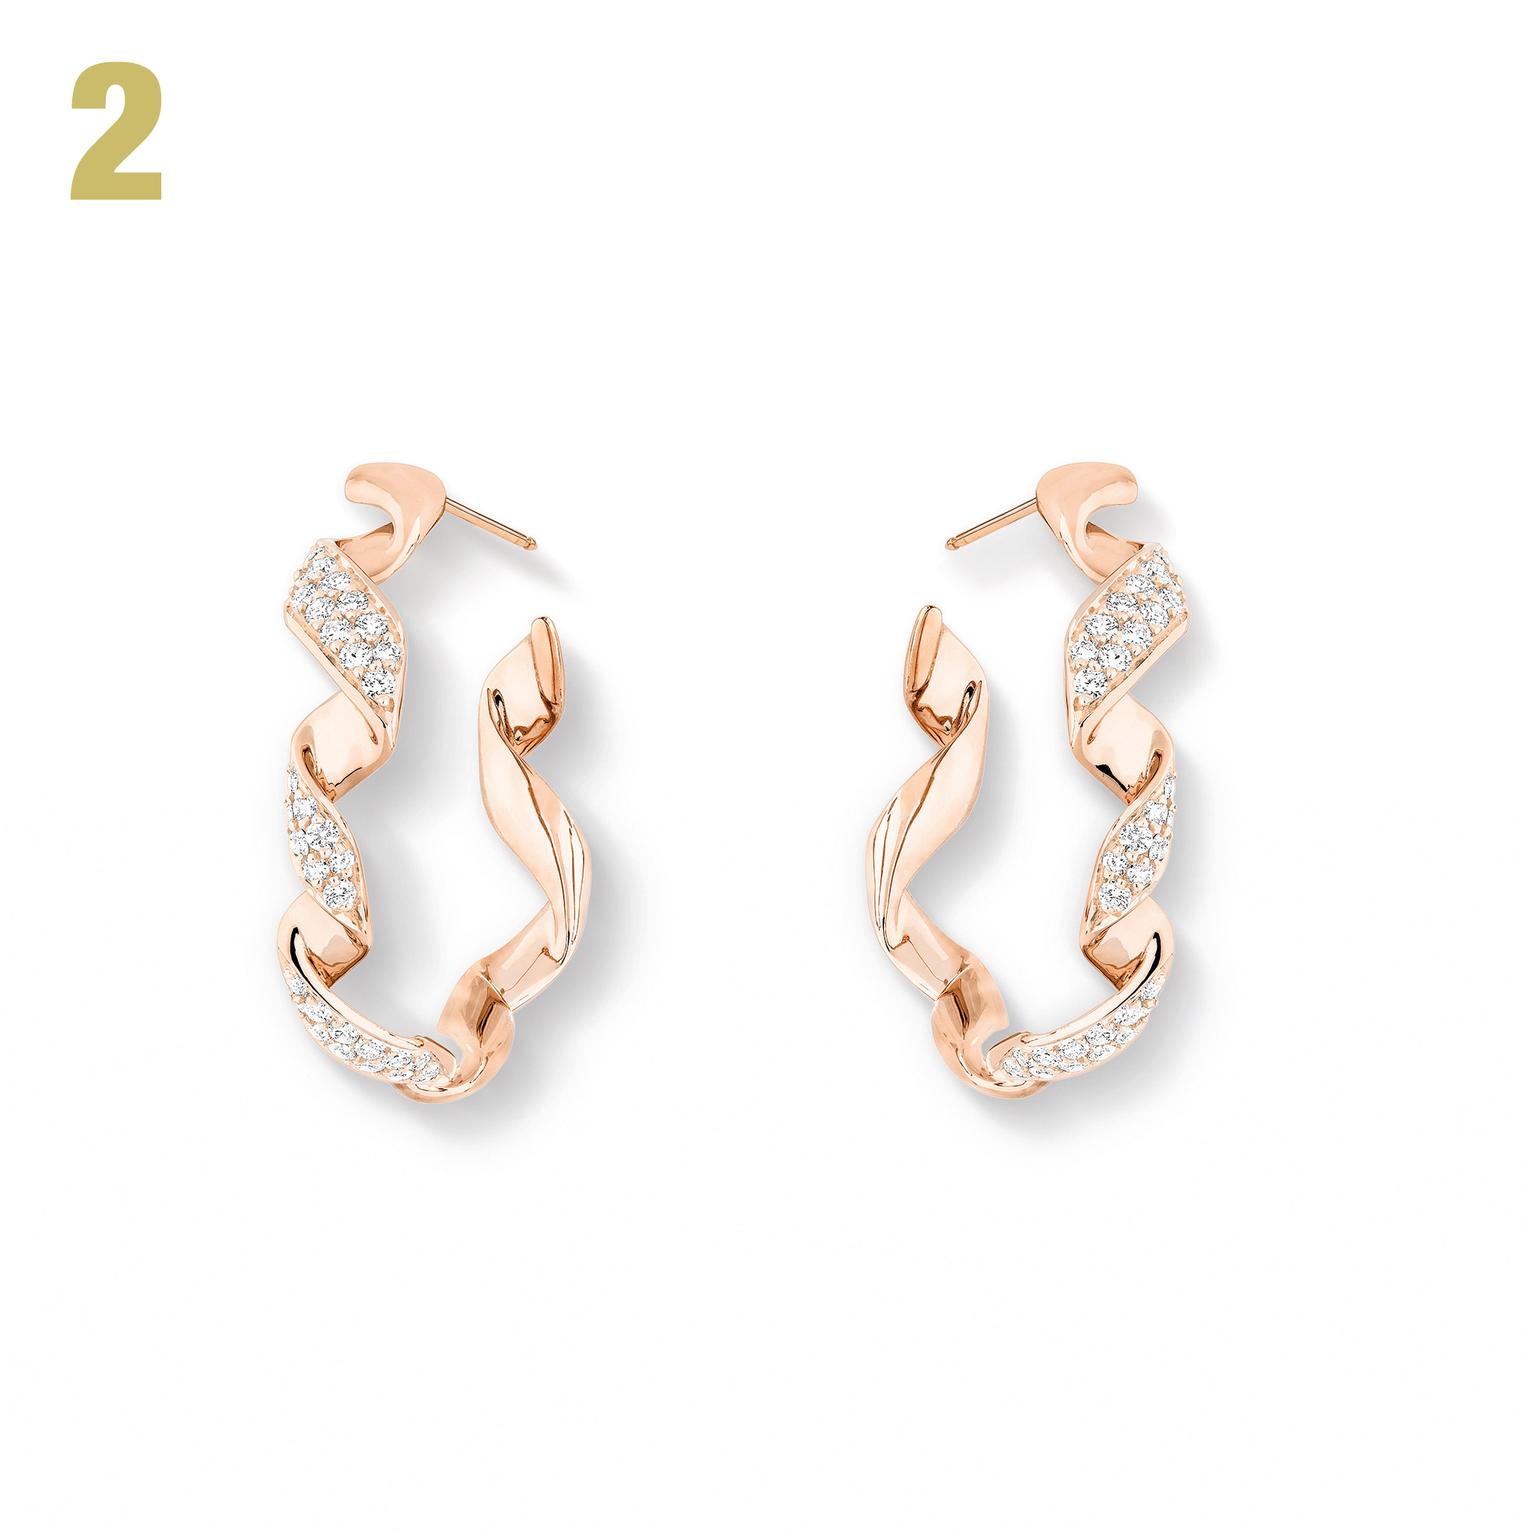 Dior Archi pink gold diamond earrings